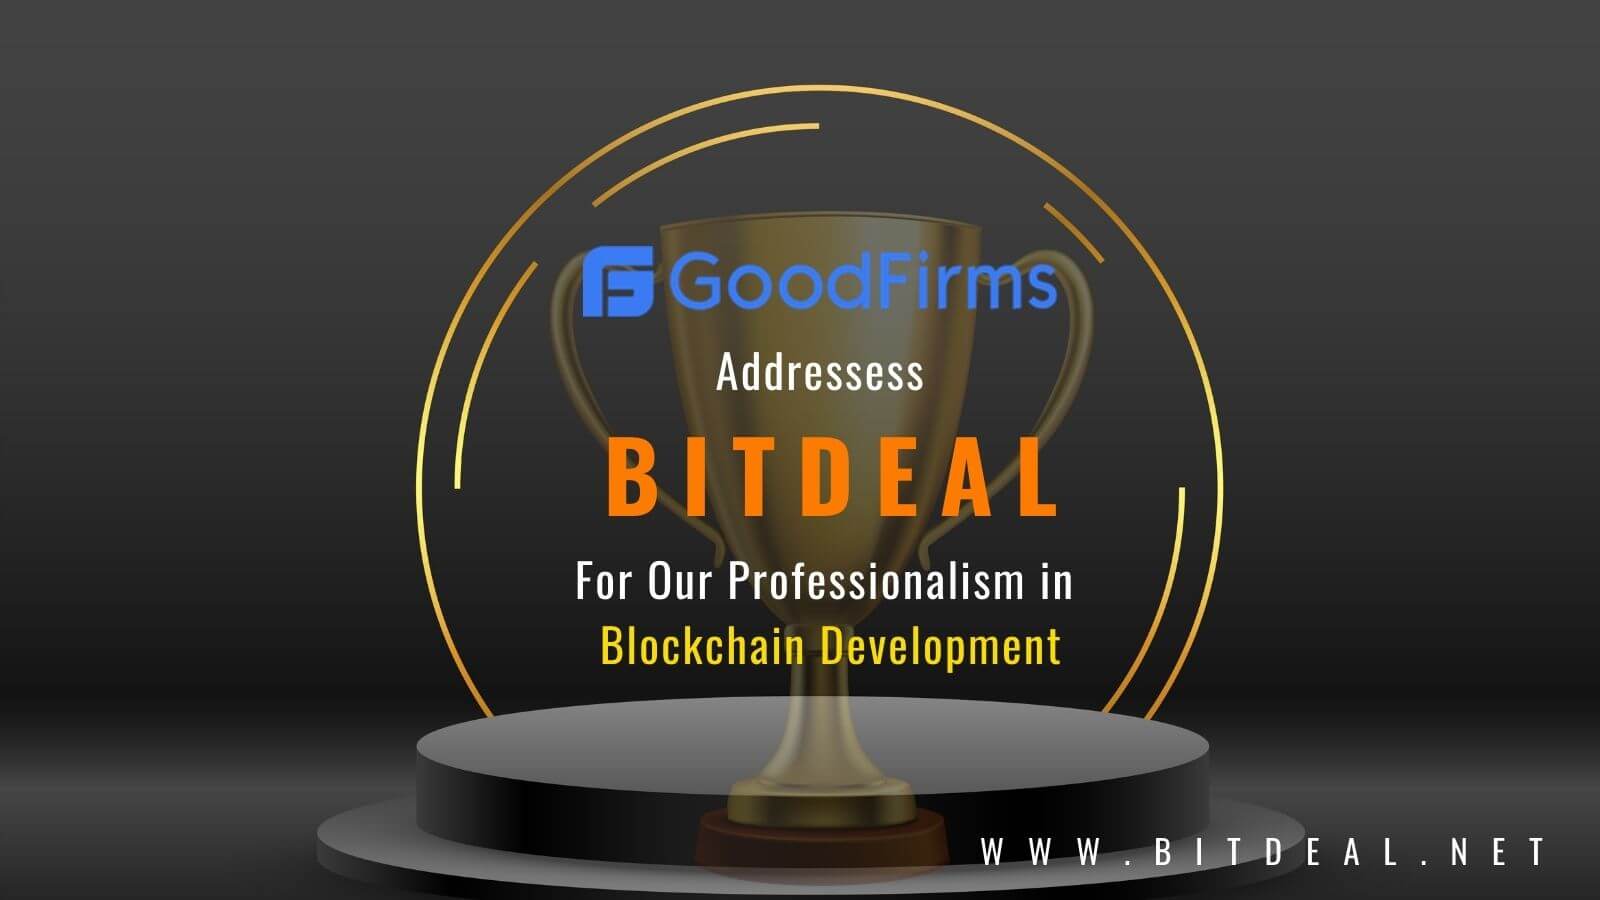 Bitdeal Paves Its Way in the List of Top Companies with  Efficient Blockchain Services: GoodFirms